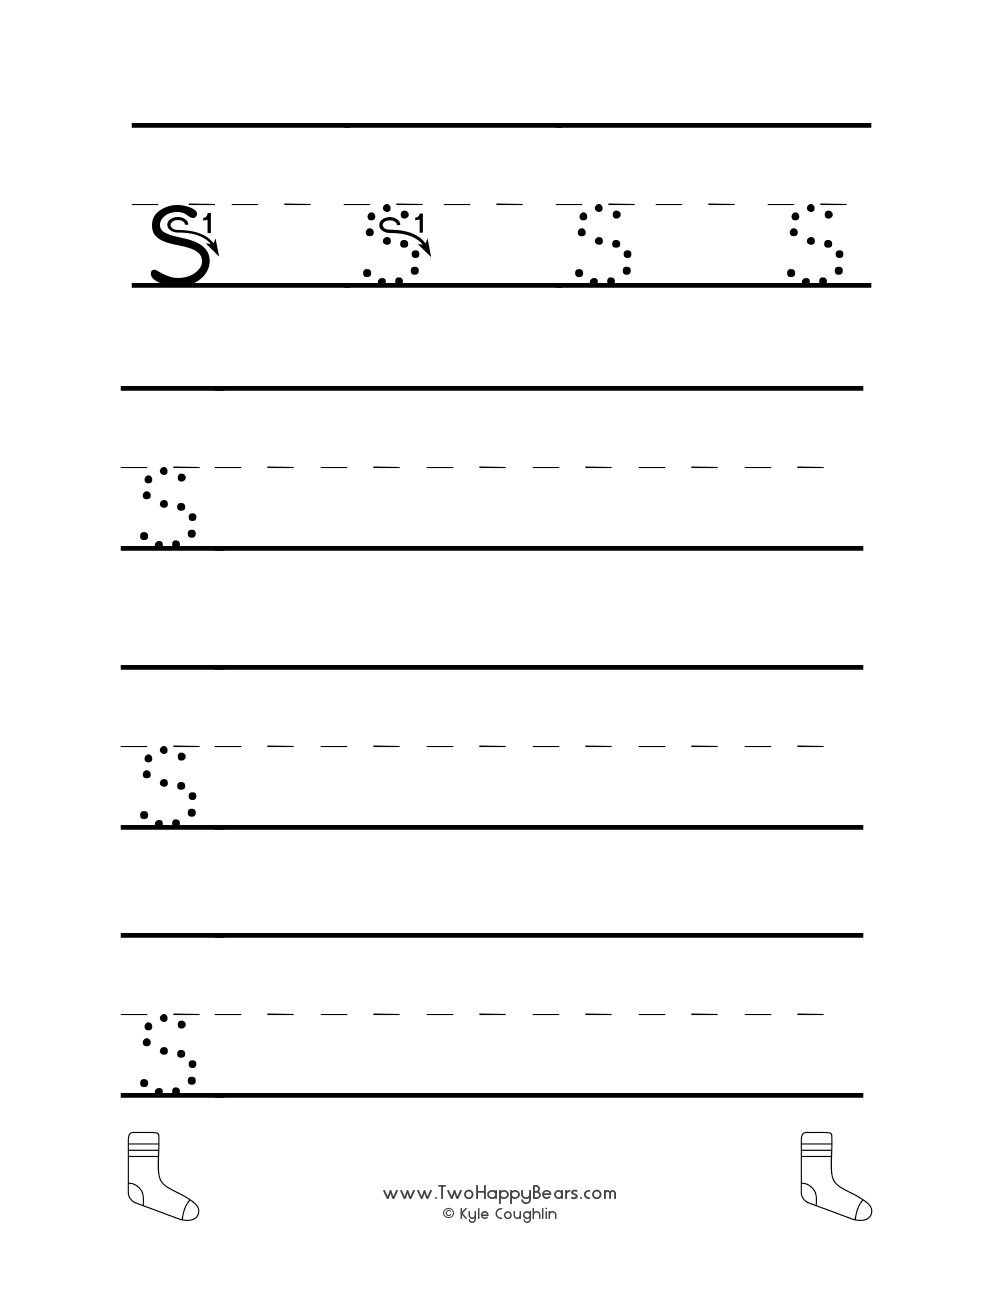 Lowercase letter S worksheet for tracing and drawing